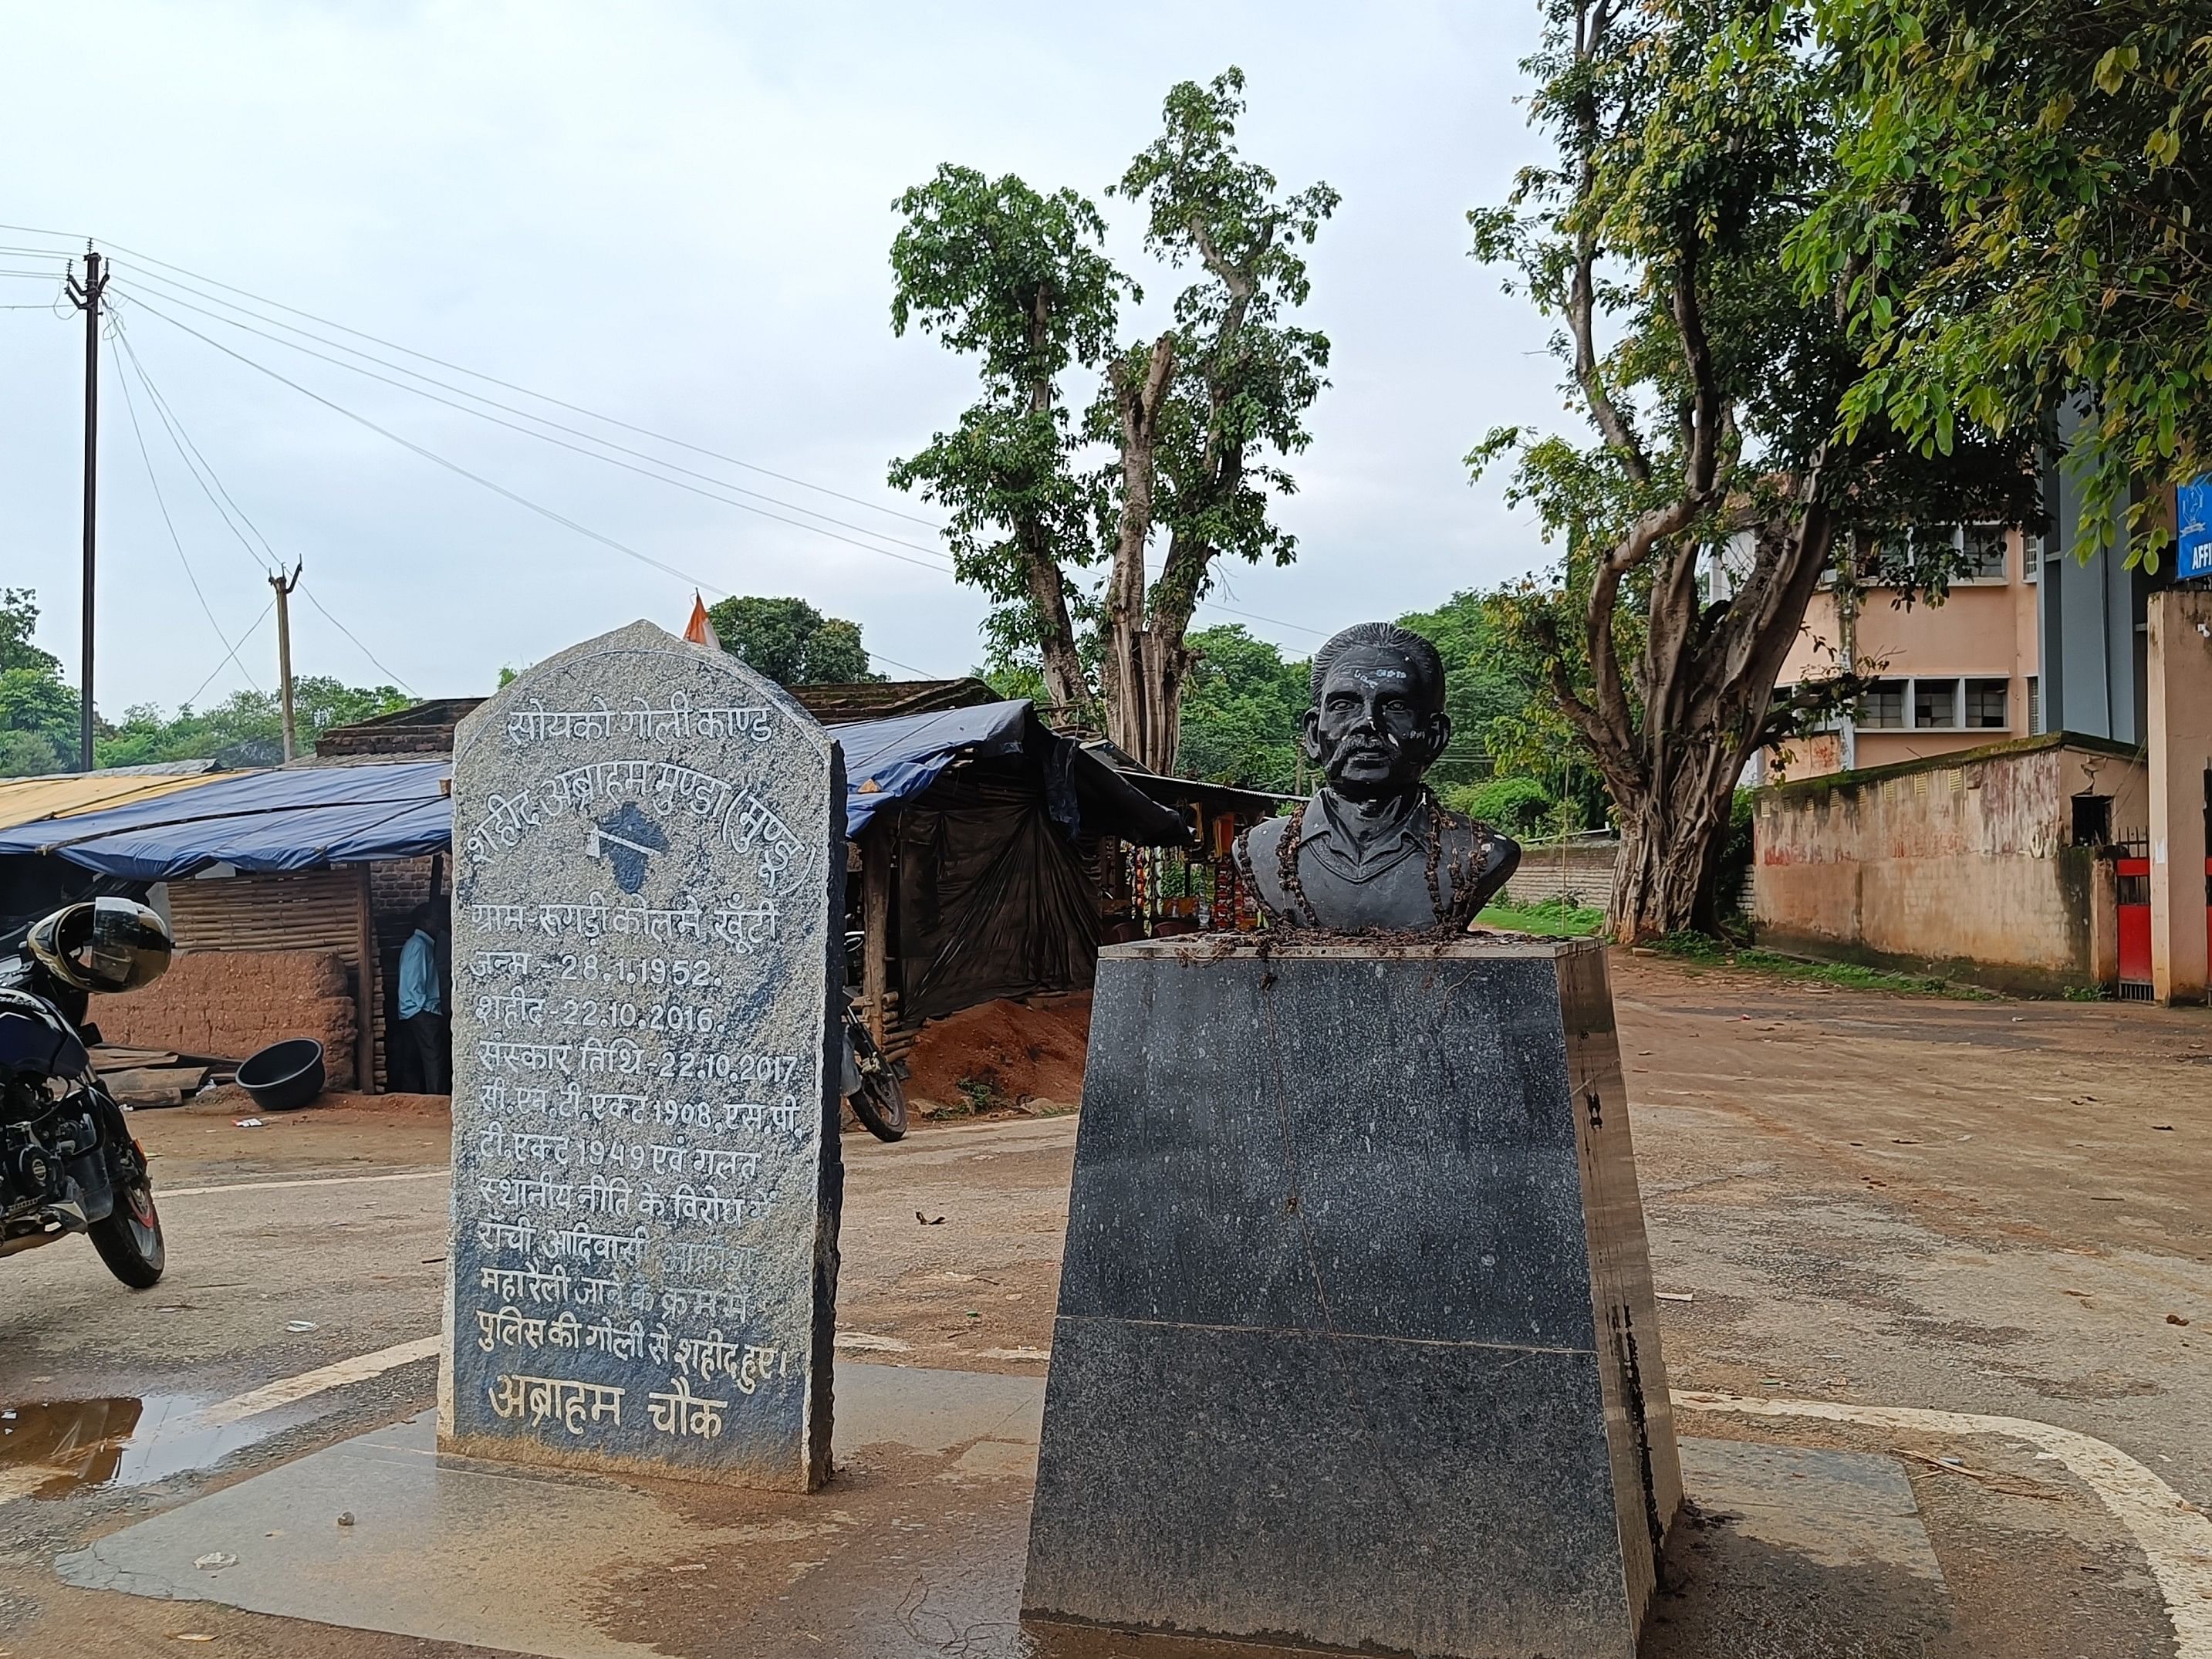 Abrahim Munda protested against the amendments in CNTA and SPTA in 2016 but was killed by a state police bullet. Tribals built a statue in his honour in Khunti | Photo: Krishan Murari | ThePrint